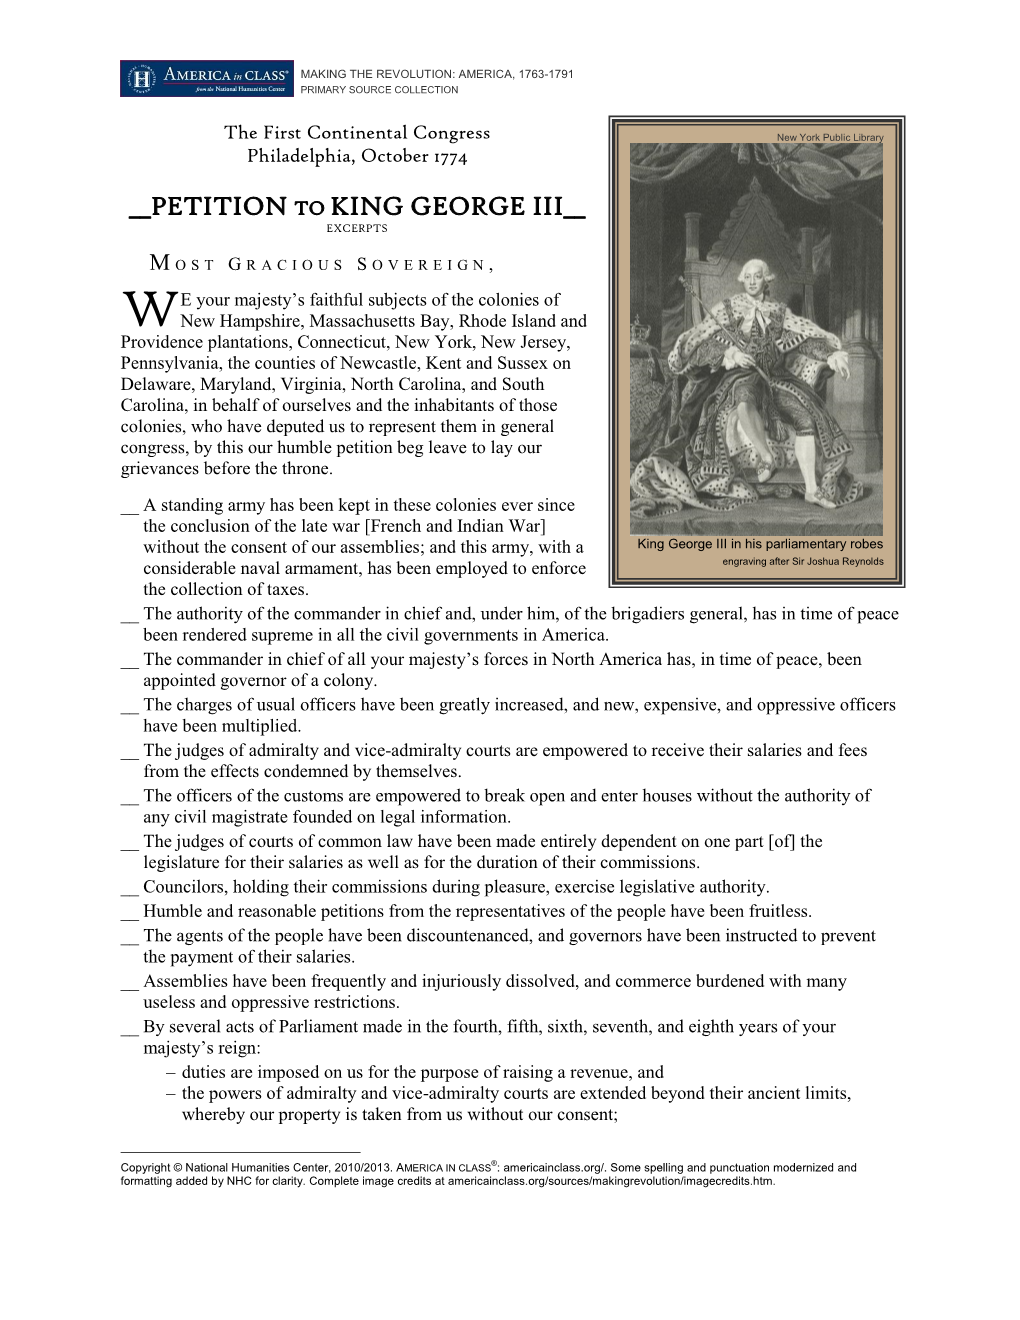 Petition to King George III, First Continental Congress, 1774